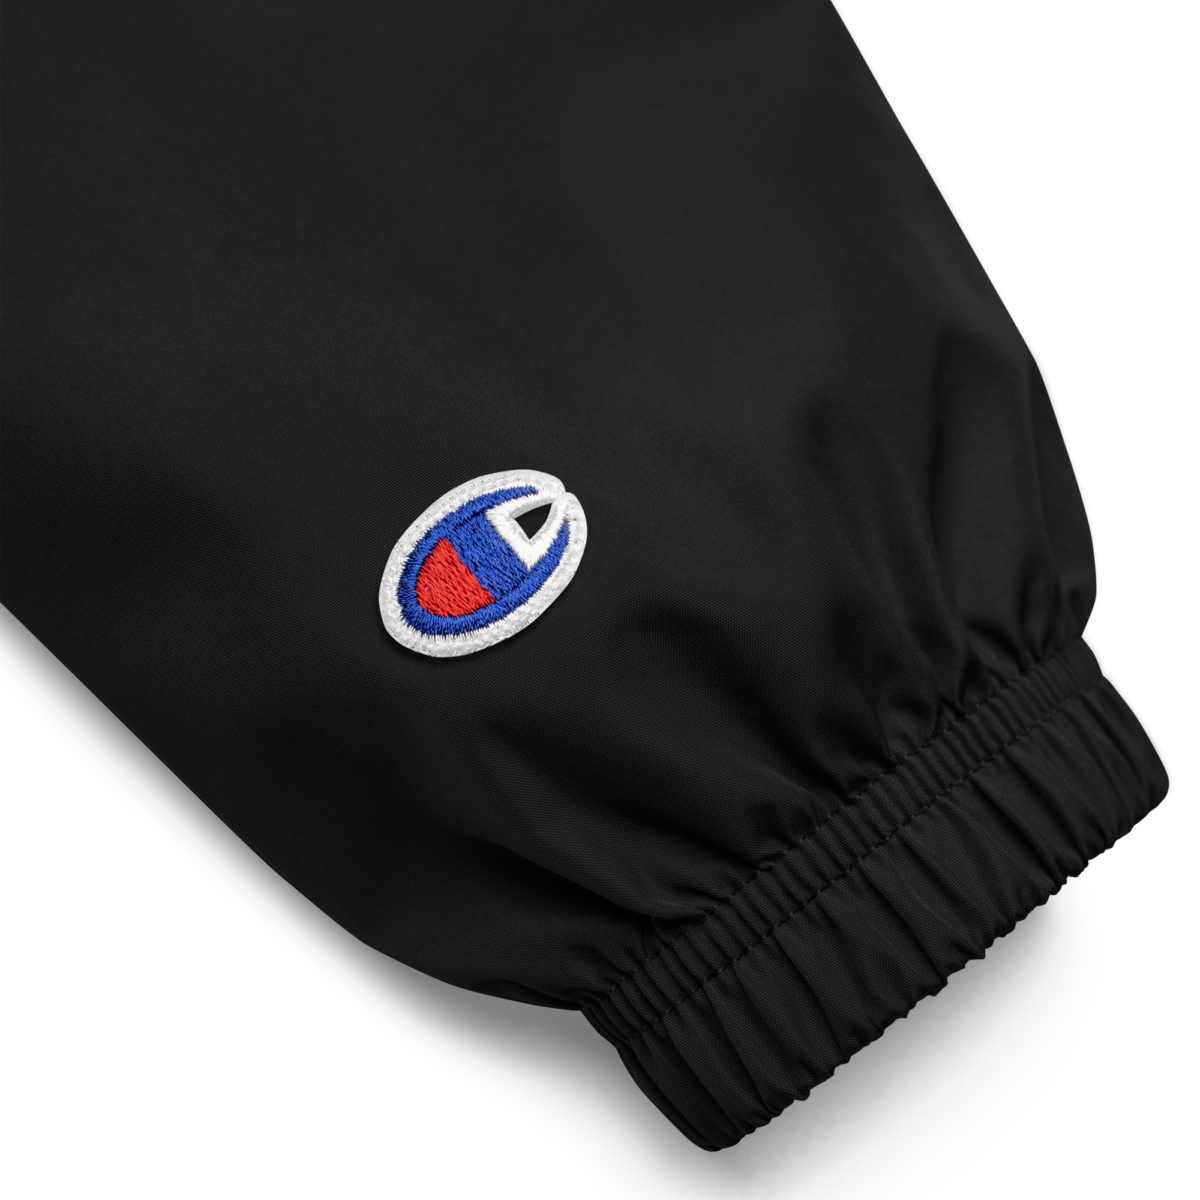 embroidered champion packable jacket black product details 6321ec1f25c95 - Bybit Champion Packable Jacket